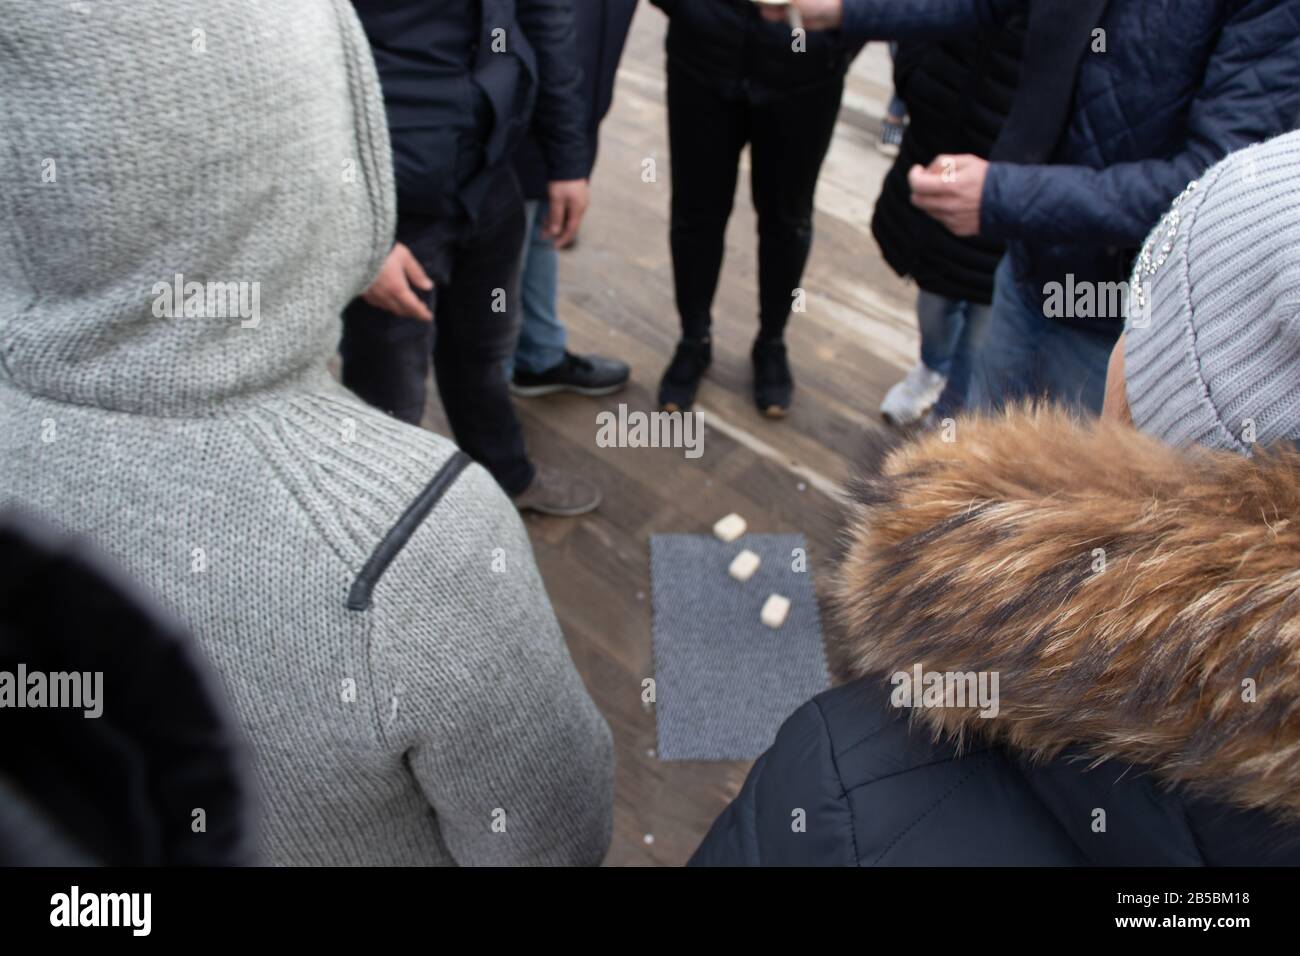 Helsinki, Finland - 3 March 2020: Cheating people on the street. The crowd is standing around and watching the gambling , Illustrative Editorial Stock Photo